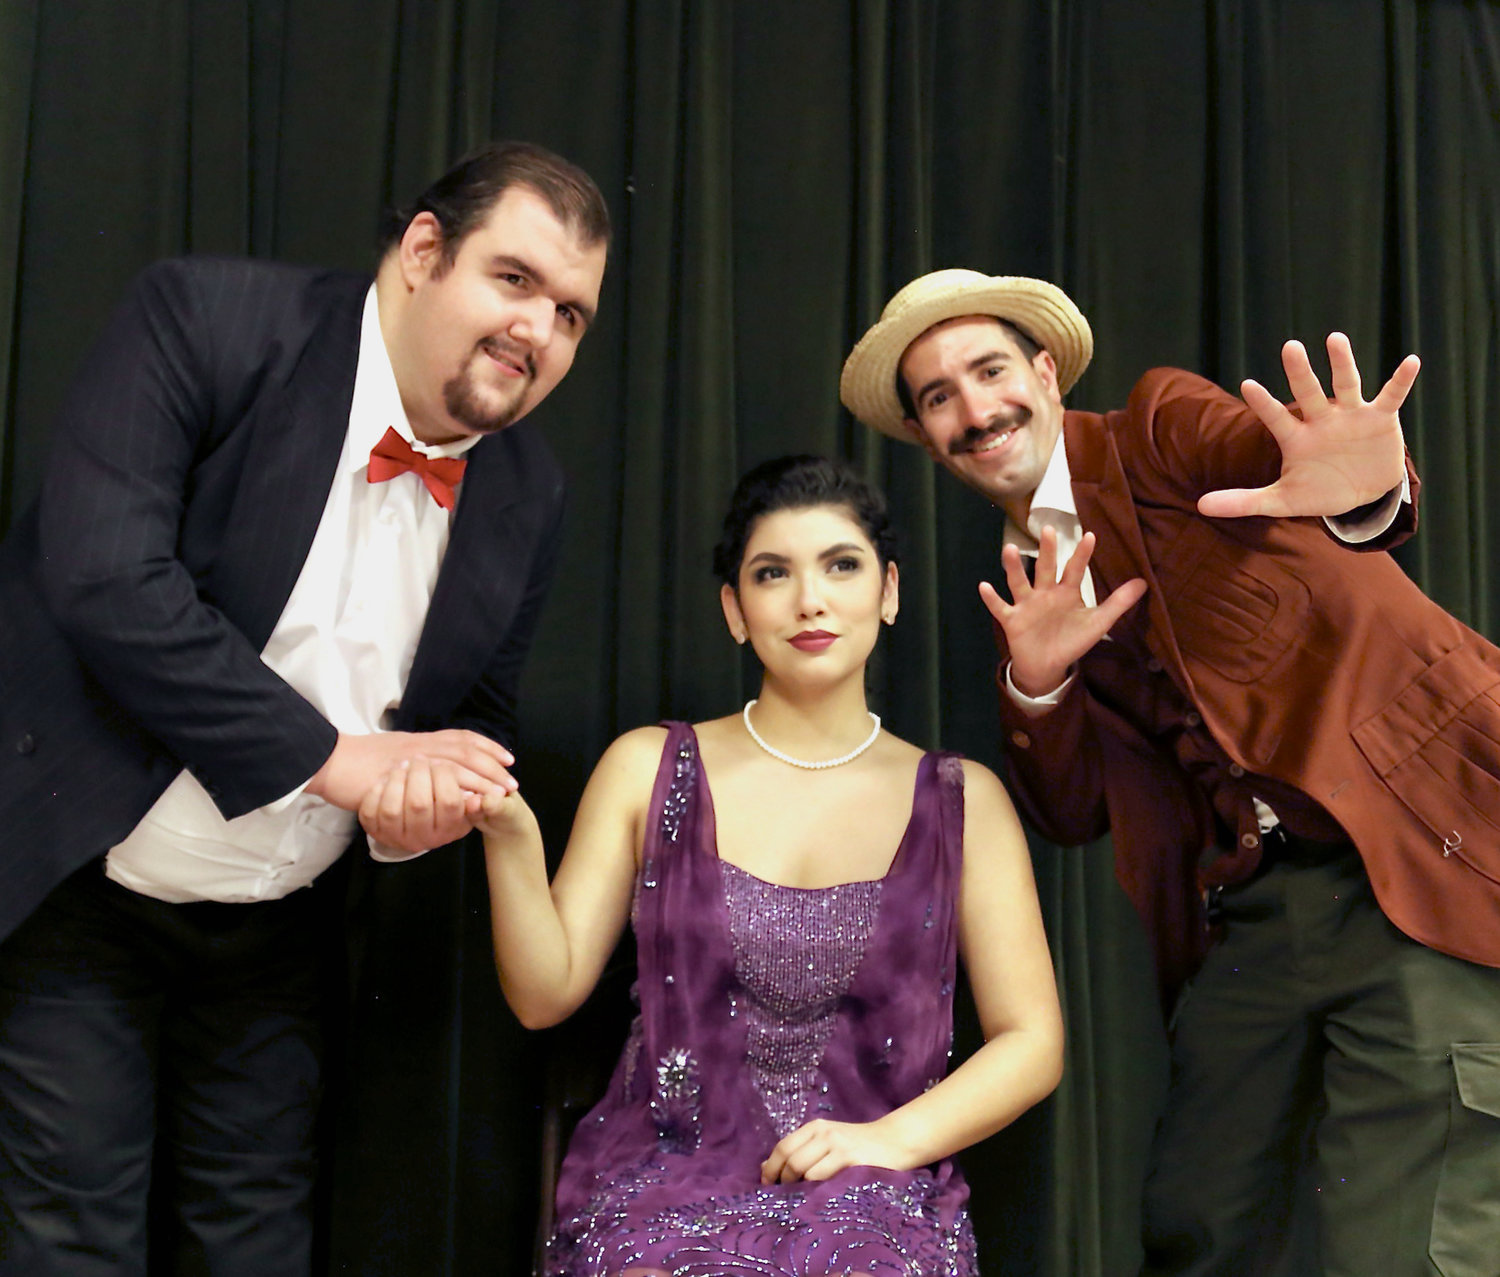 Yum-Yum (Sabrina Lopez) weighs the merits of two suitors, the earnest Nanki-Poo (Richard Risi, left) and the wily Ko-Ko (Michael John Ruggiere), in the Gilbert & Sullivan Light Opera Company of Long Island’s 2022 production of “The Mikado: A Long Island Fantasy.”